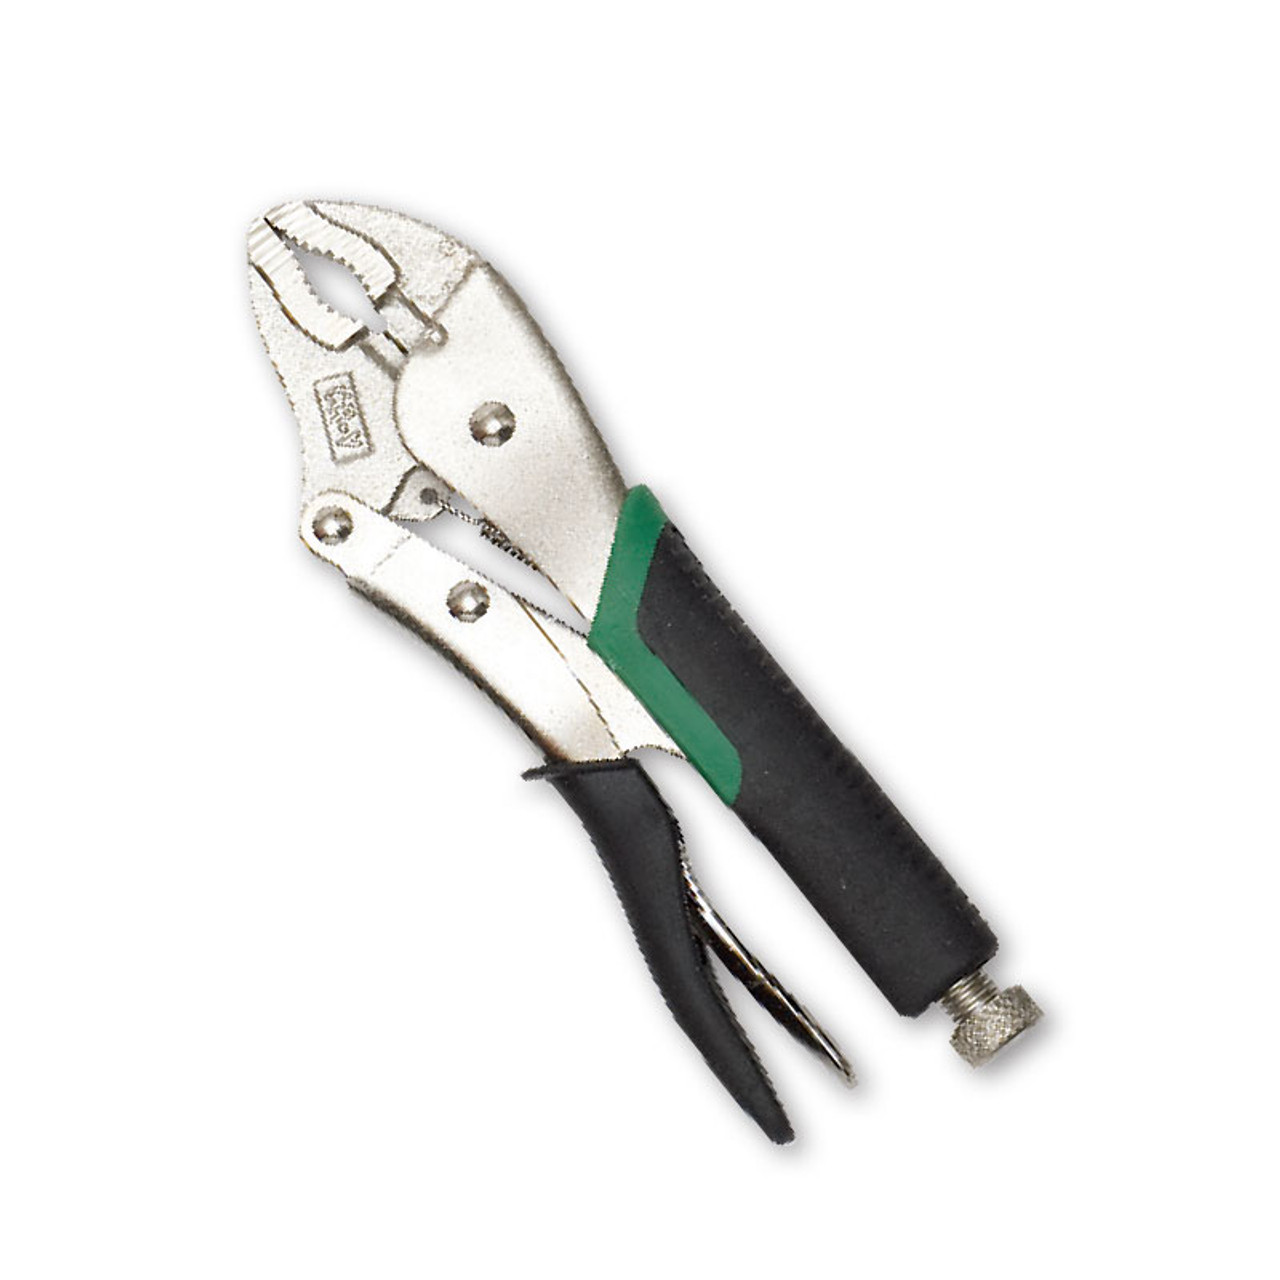 Pliers - Locking Insulated Handle 10"